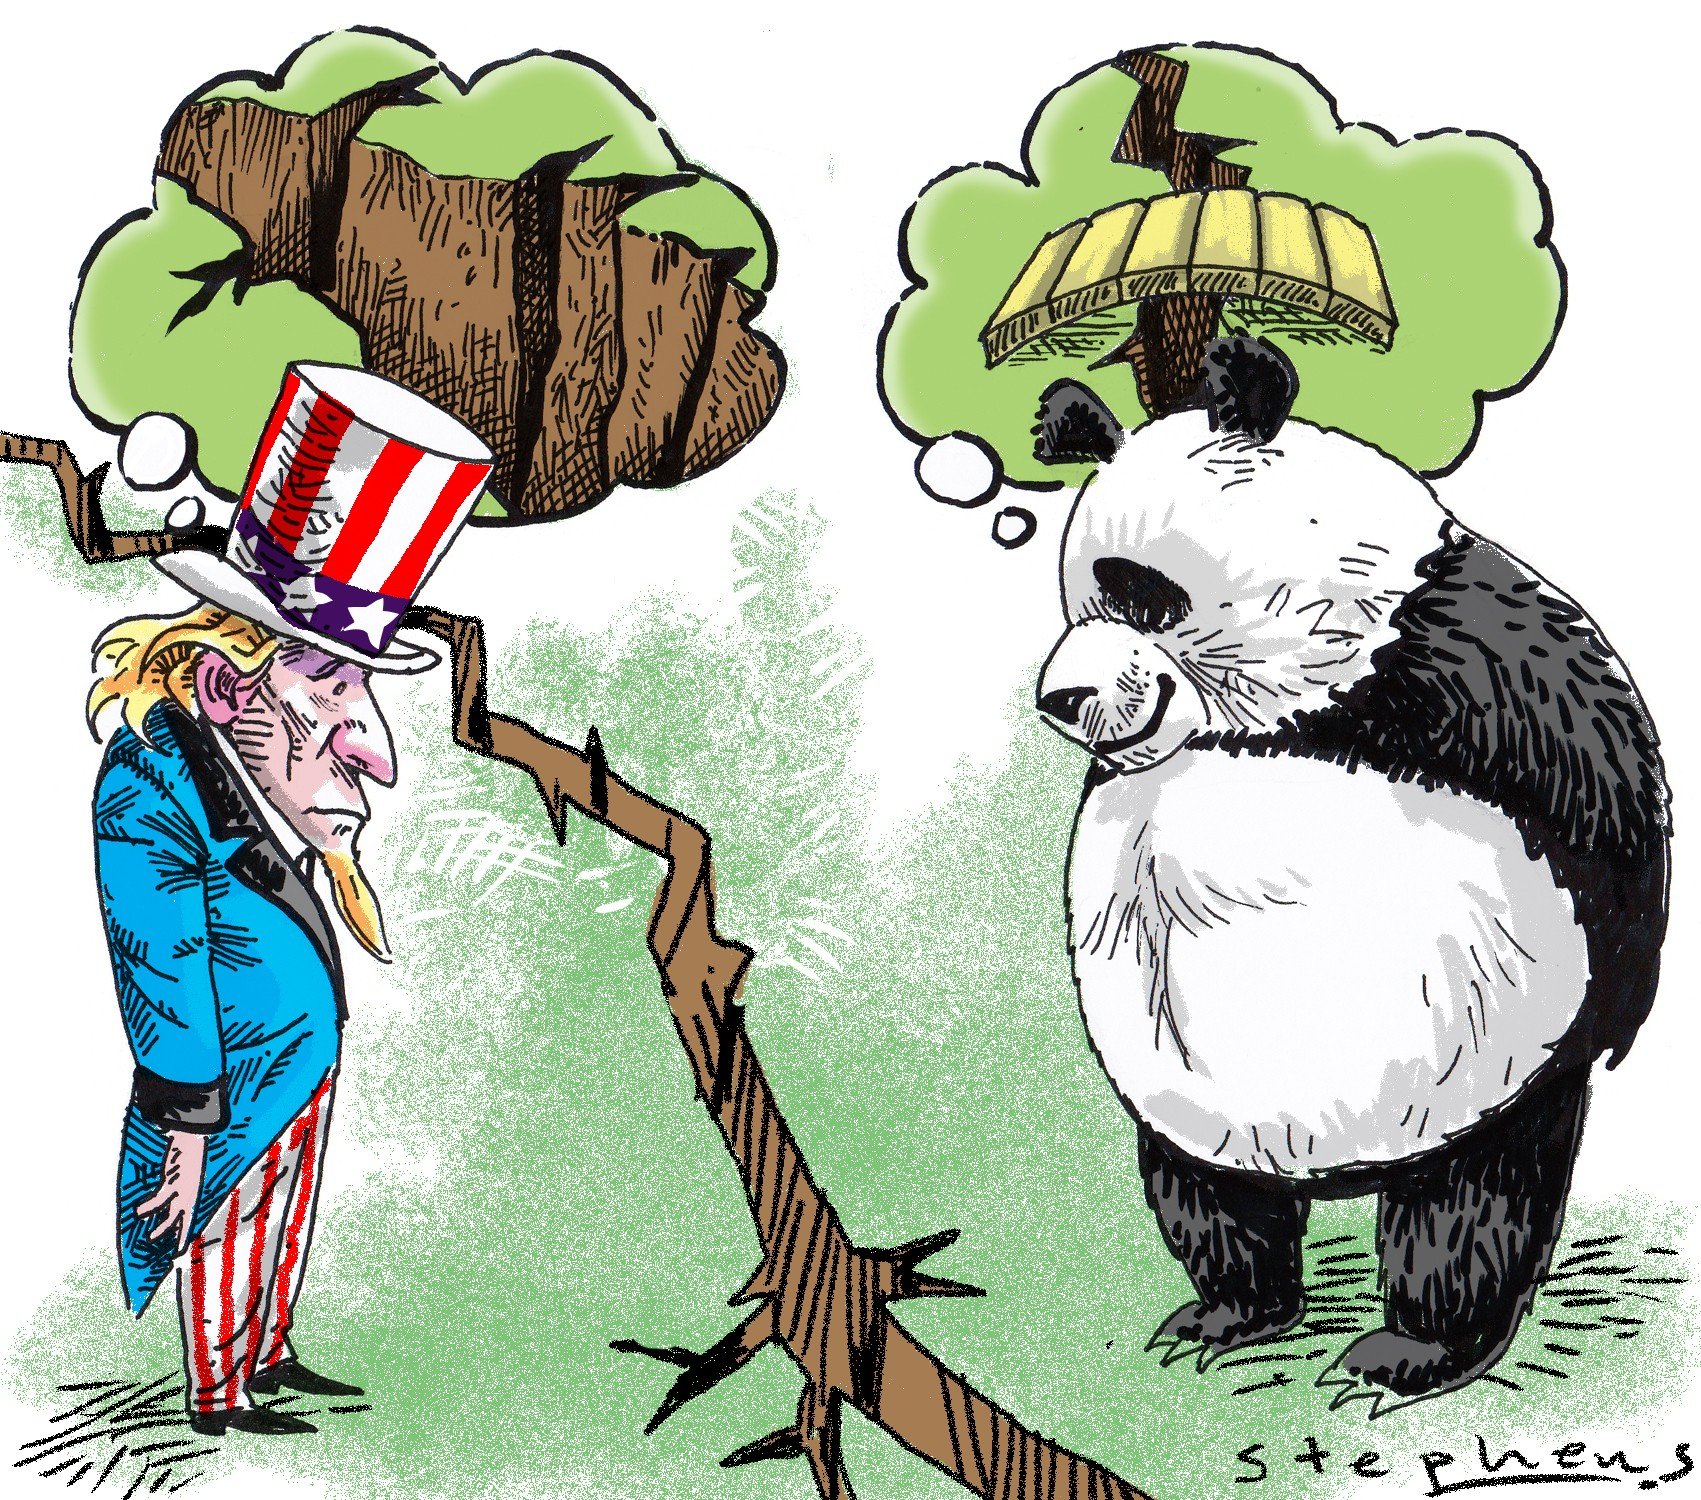 Nong Hong says while there may be a consensus that China-US relations have entered a new era, assessments of the change in the bilateral relationship are starkly different in the two countries